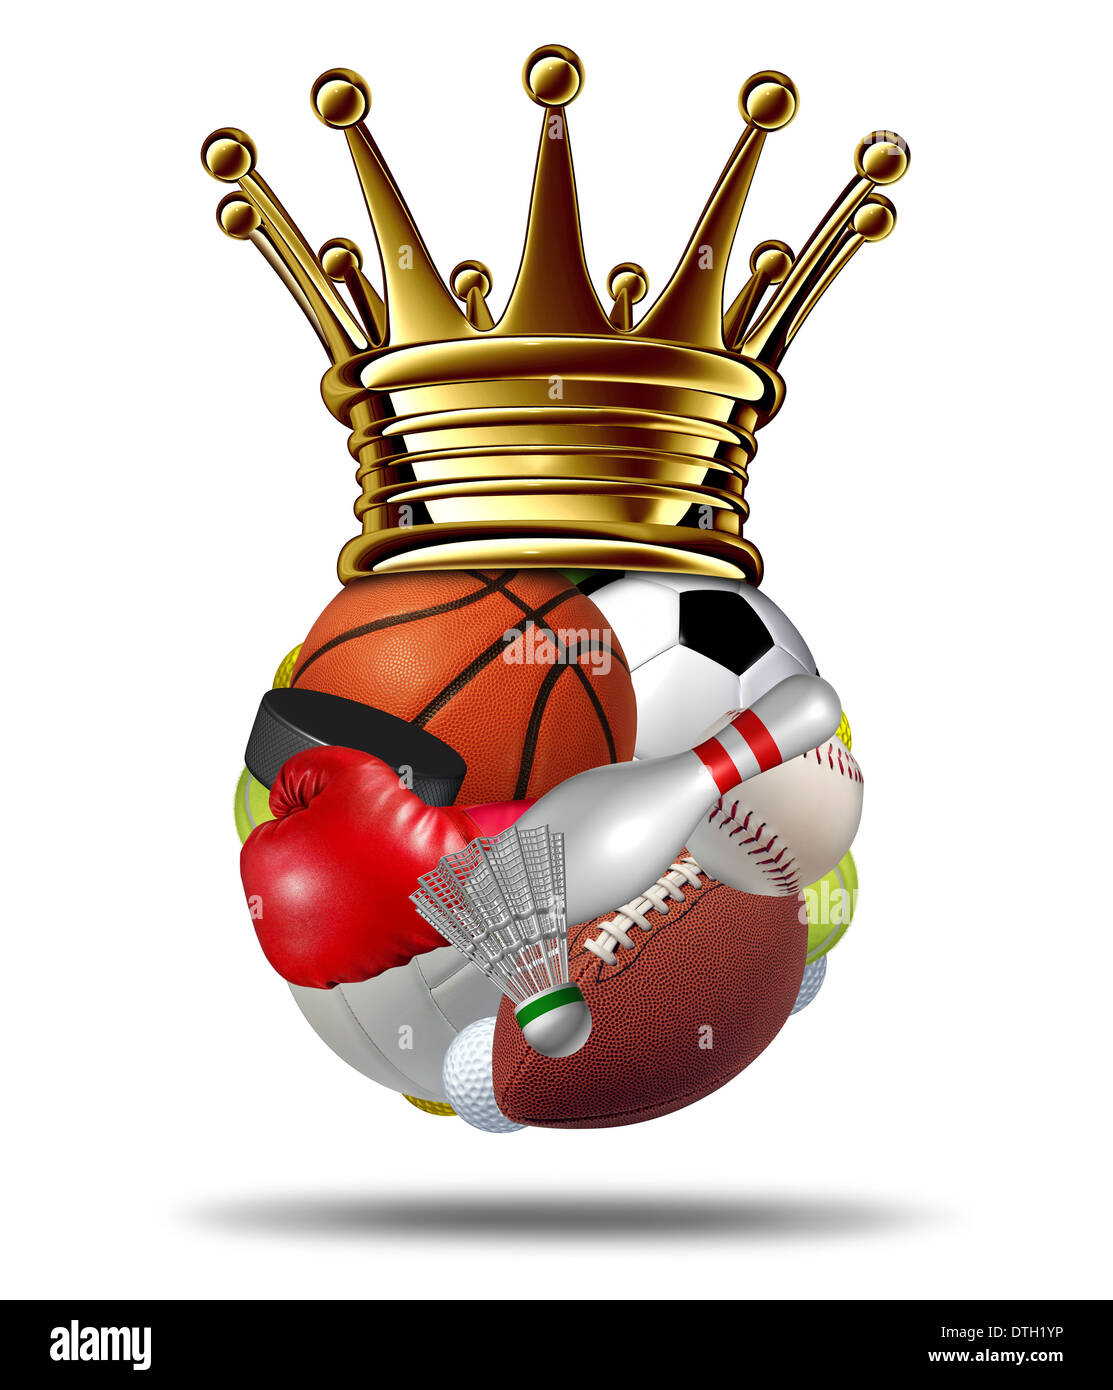 Sport winner concept with a group of sports equipment as a football basketball baseball soccer tennis golf volleyball hockey boxing and badminton shaped as a sphere ball wearing a gold crown as a symbol of fitness victory. Stock Photo